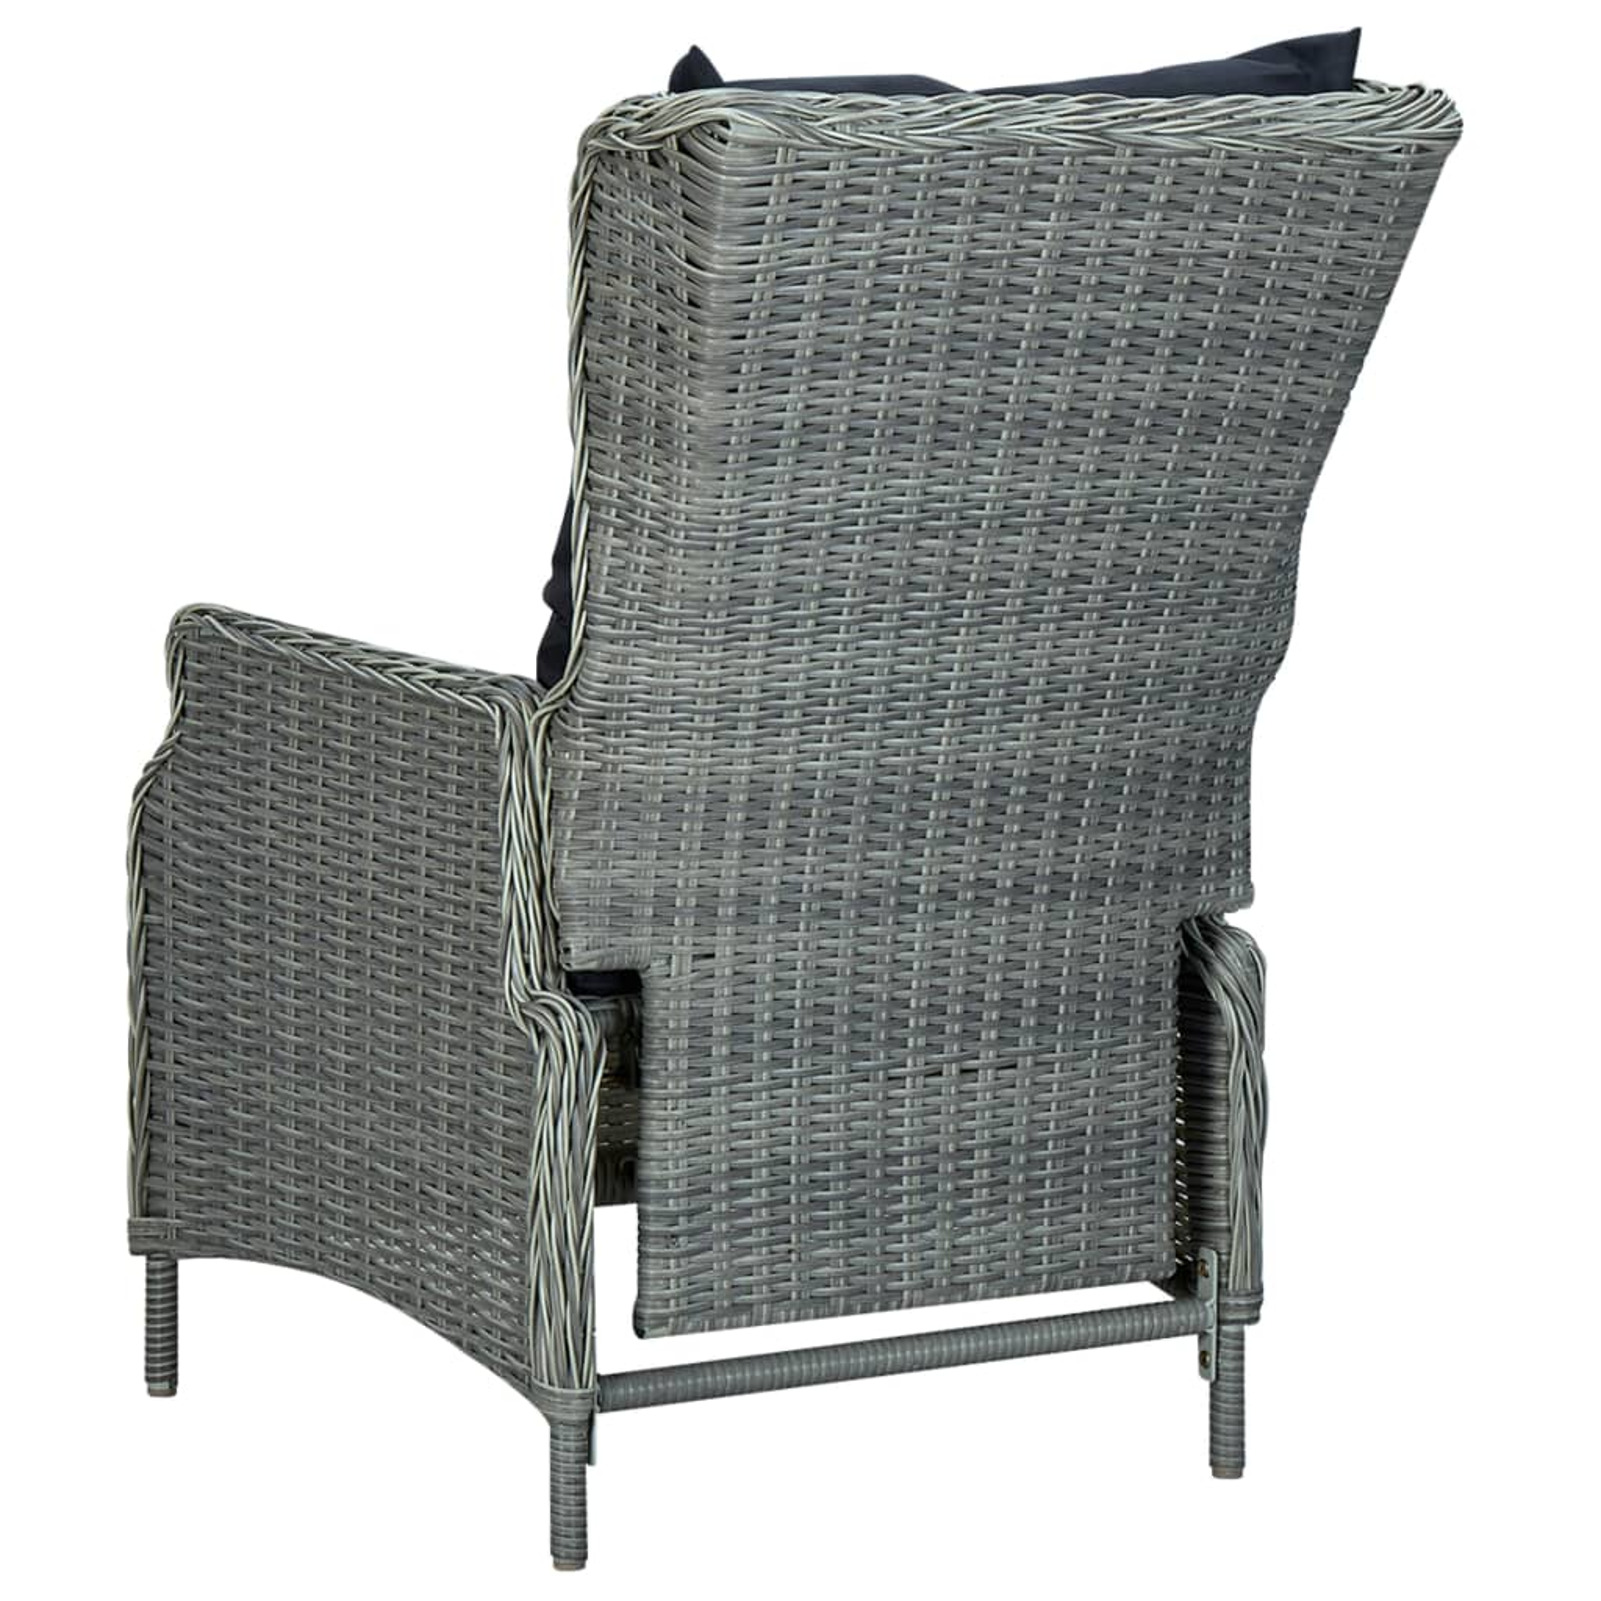 Suzicca Reclining Patio Chair with Cushions Poly Rattan Gray - image 5 of 7